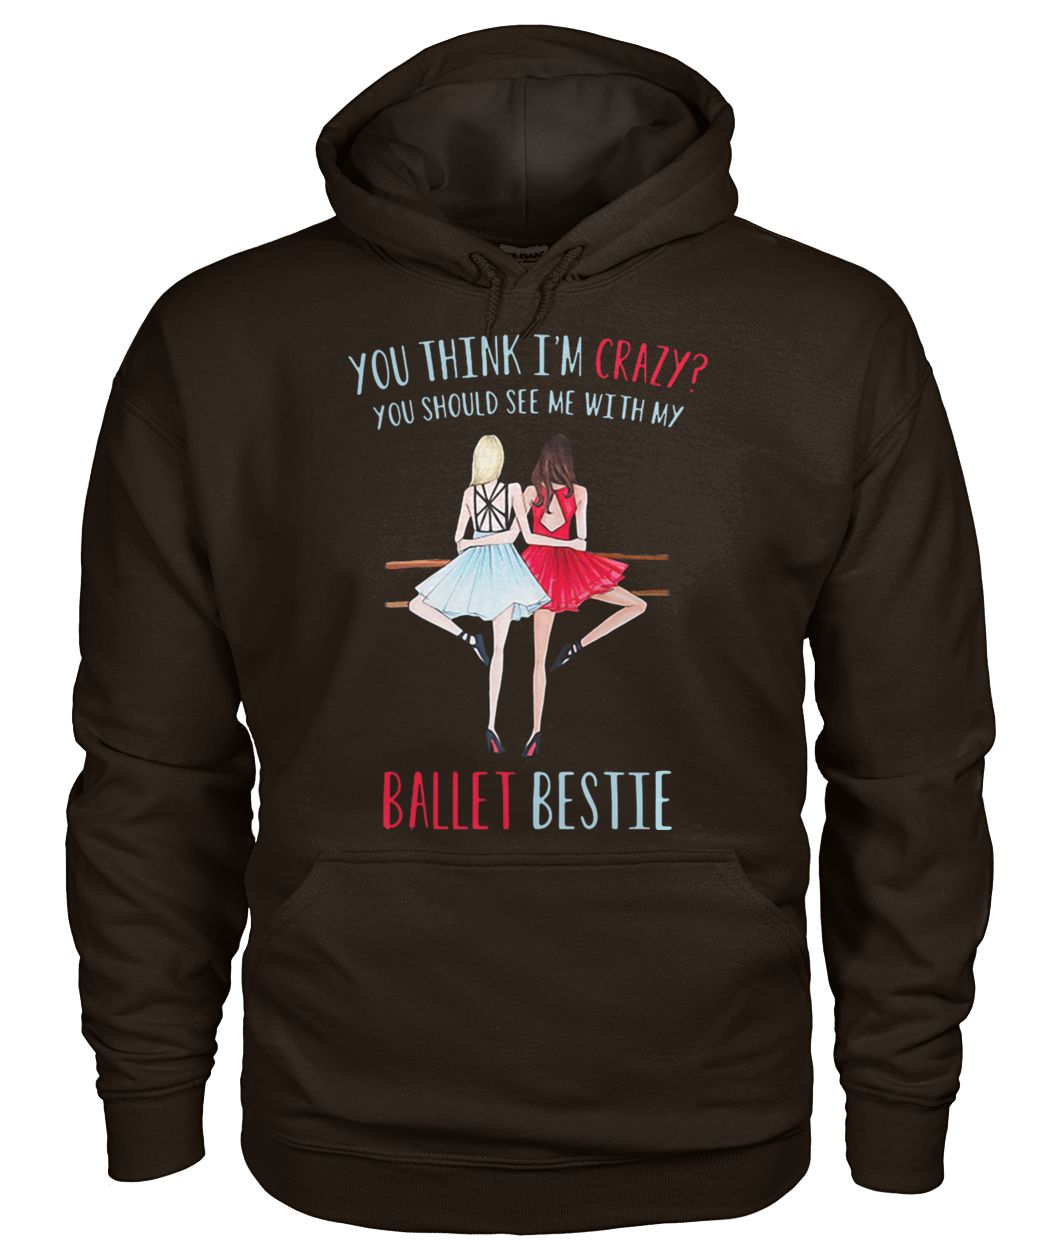 You think I'm crazy you should see me with my ballet bestie gildan hoodie